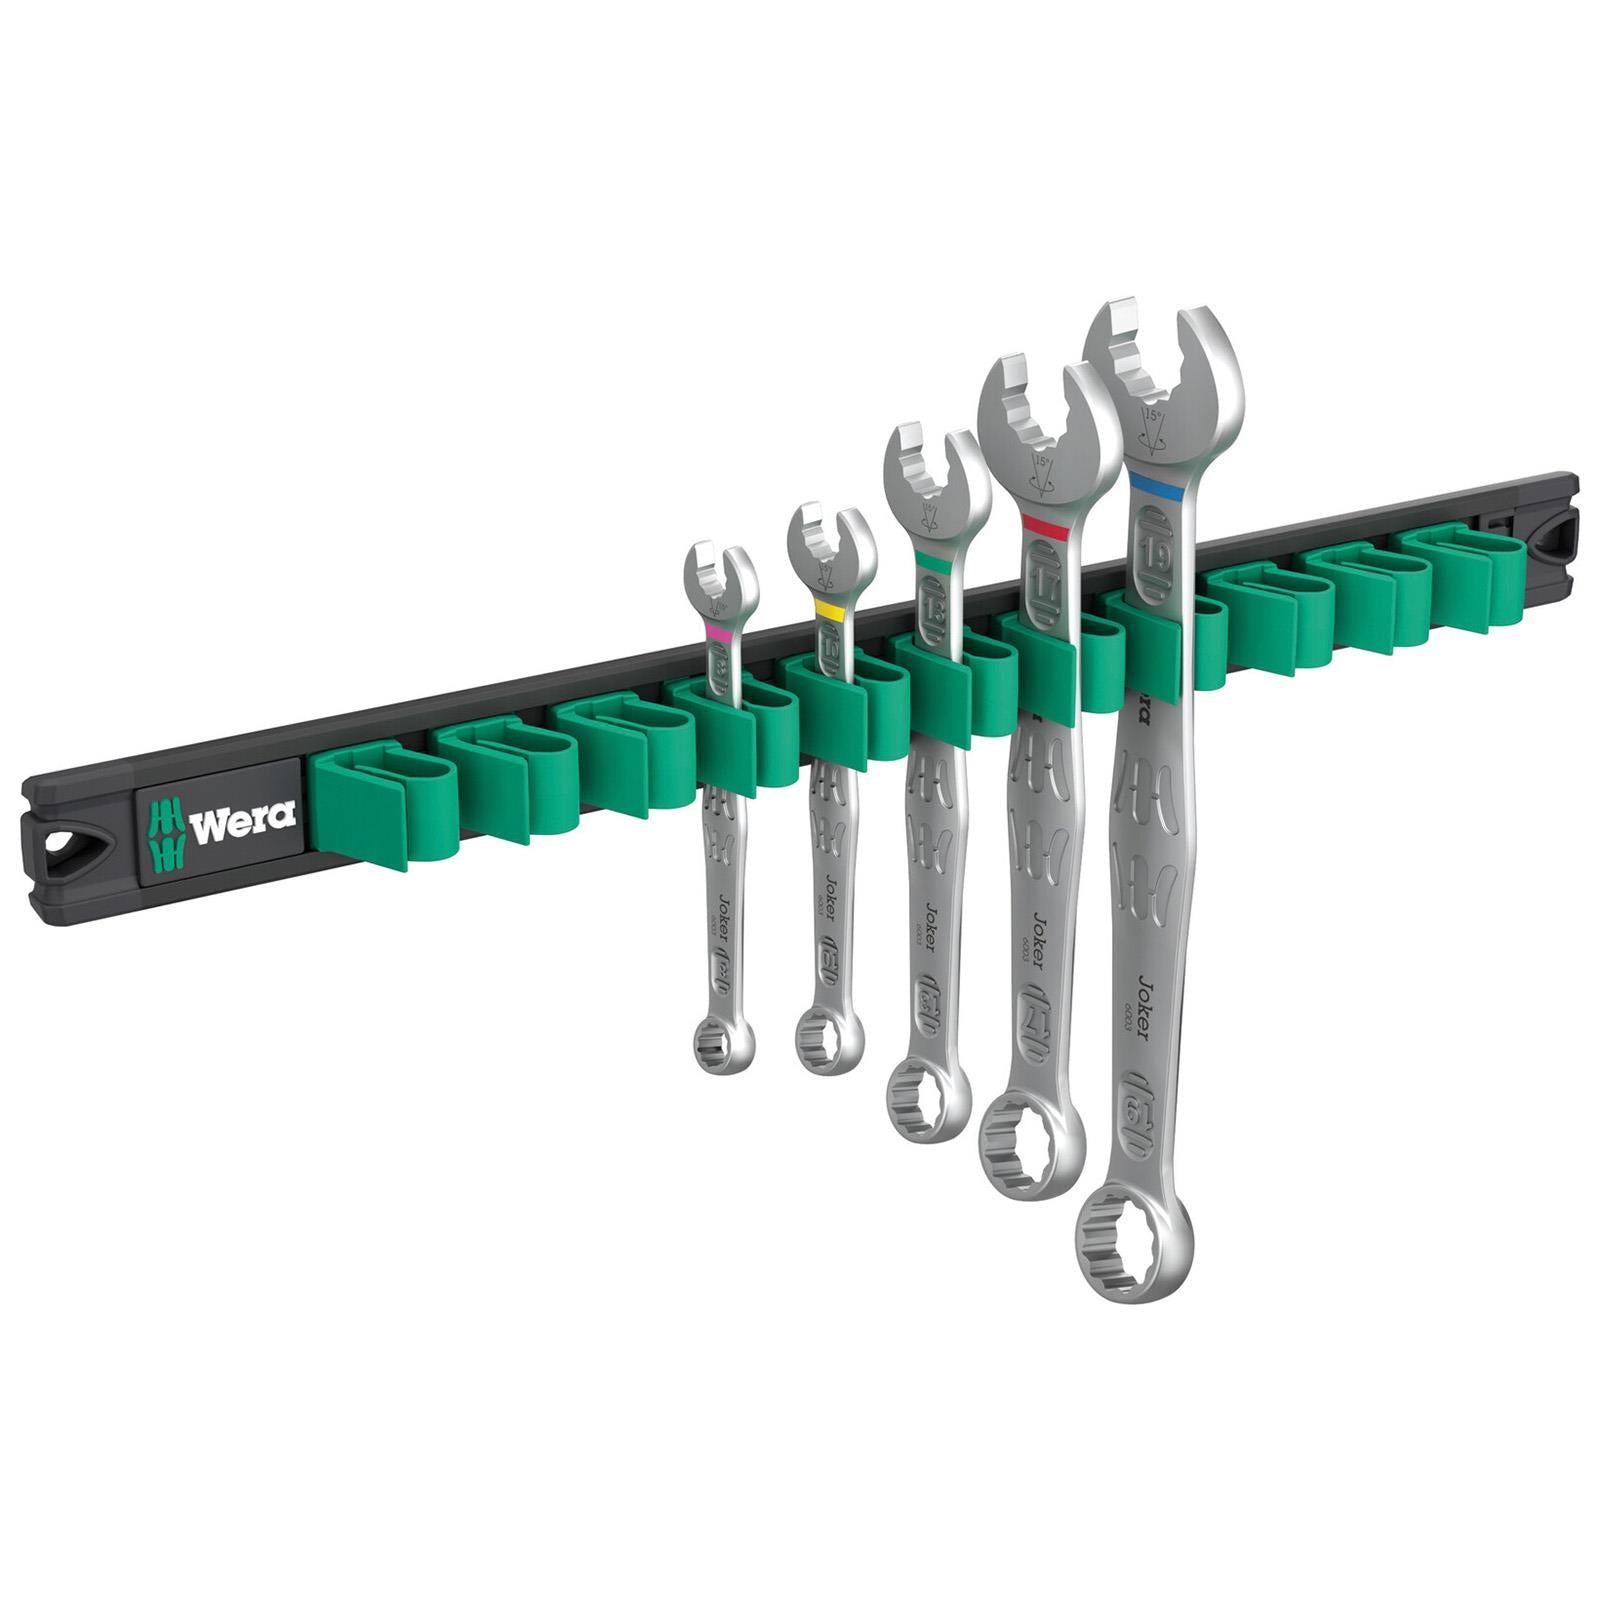 Wera Combination Spanner Wrench Set 6003 Joker 2 9641 Magnetic Rail 5 Pieces 8-19mm